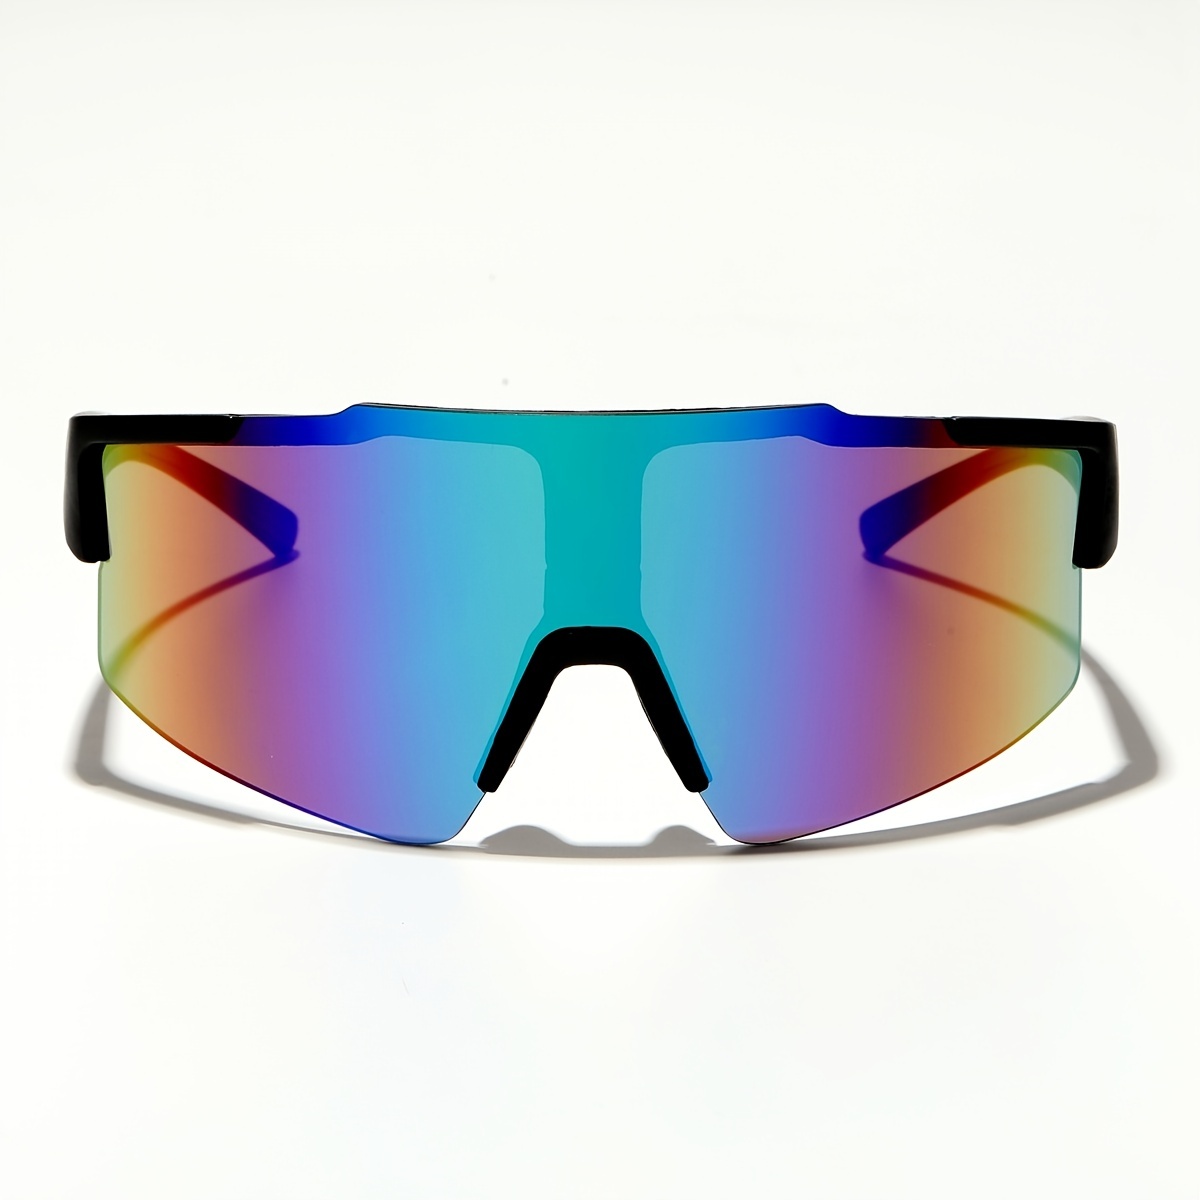 * Y2K Cyberpunk Sunglasses - UV400 Protection, Lightweight Full-Wrap Frame  for Driving, Boating, Fishing, Softball, Beach, and Cycling